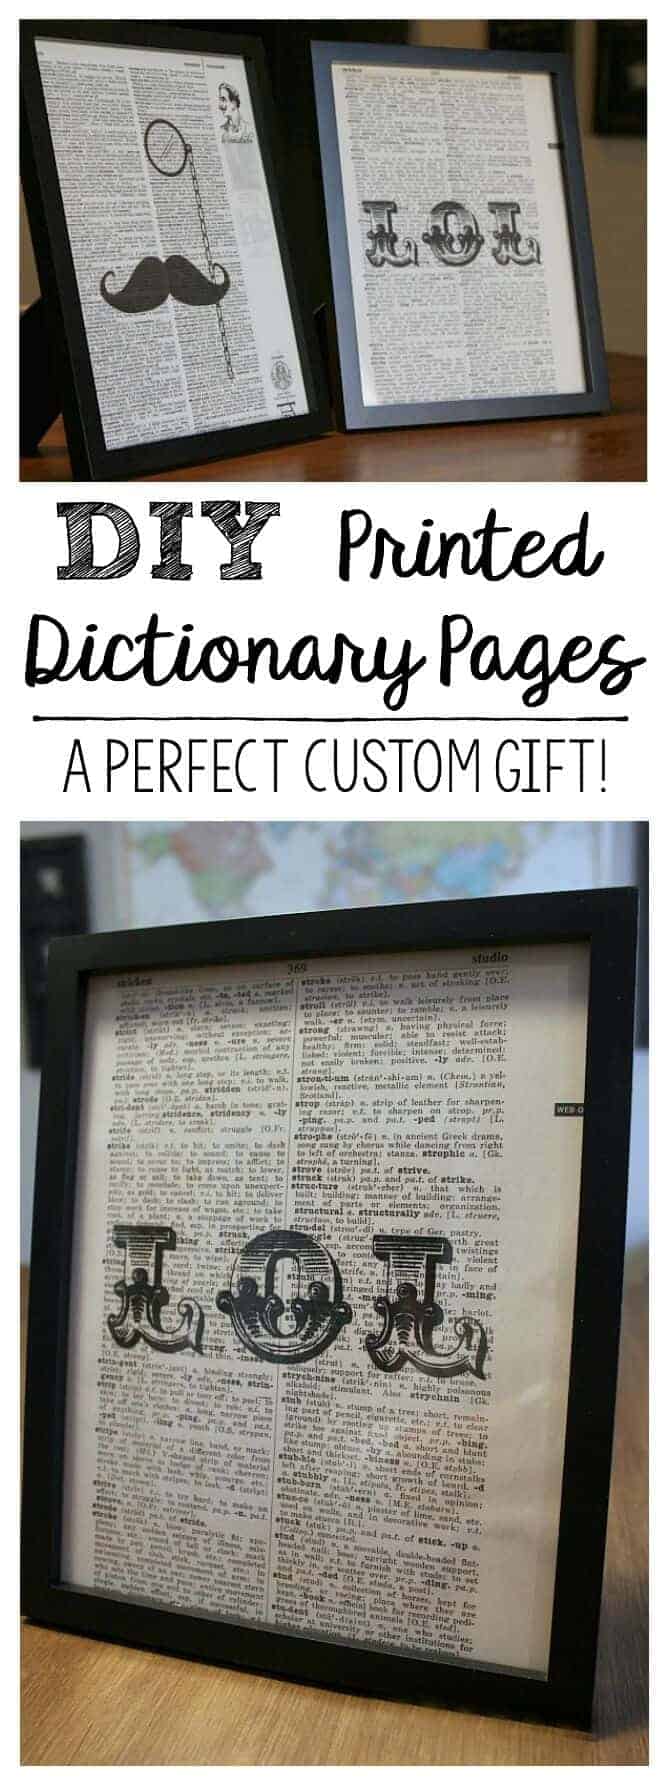 DIY Printed Dictionary Pages : a perfect custom gift! All it takes is an old dictionary, a printer and a design you want.